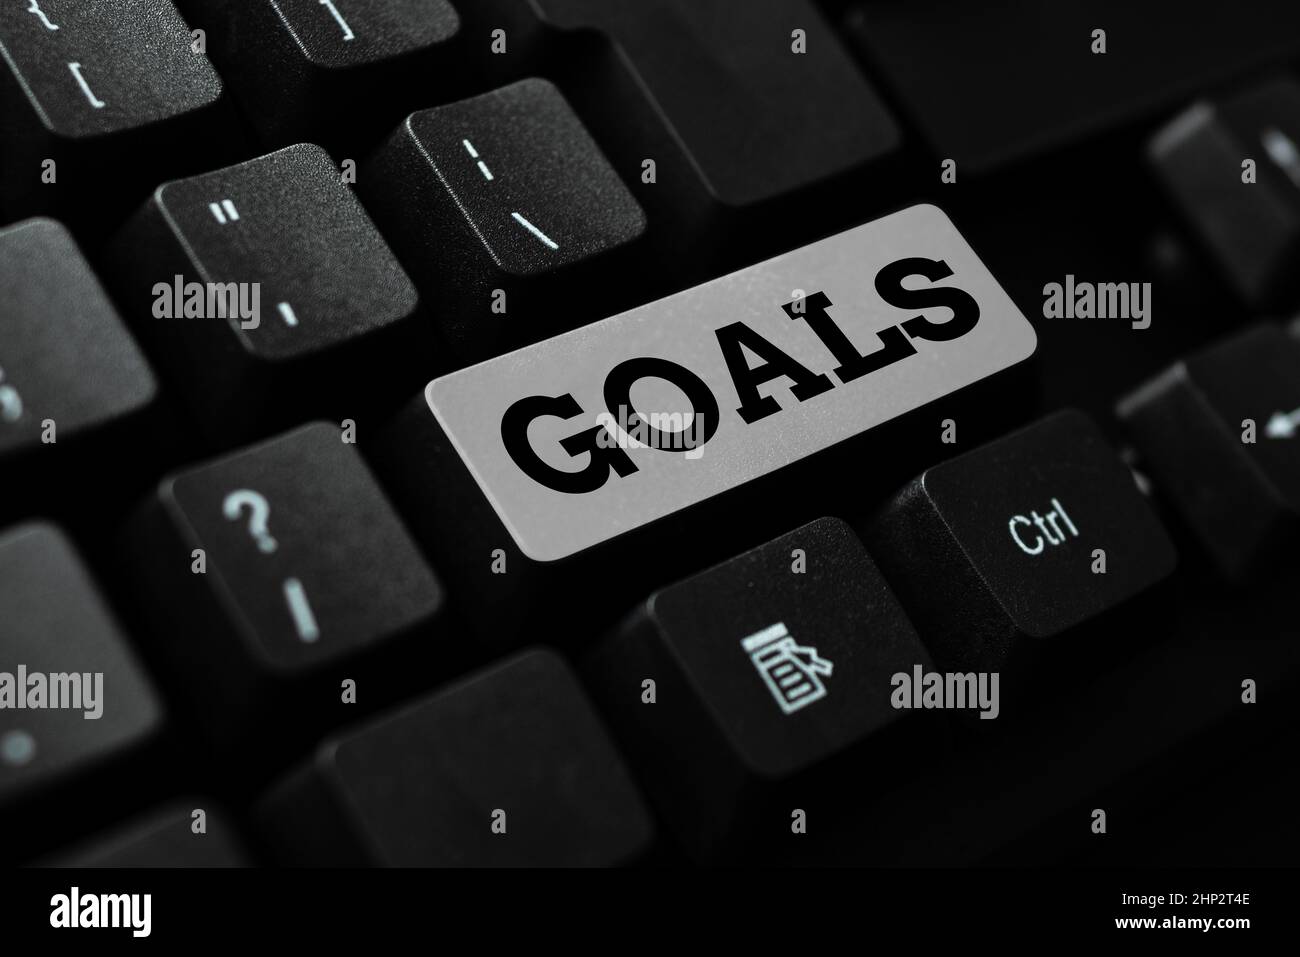 Text sign showing Goals, Internet Concept persons ambition or effort aim desired result Sport match Winning Typing Daily Reminder Notes, Creating Onli Stock Photo